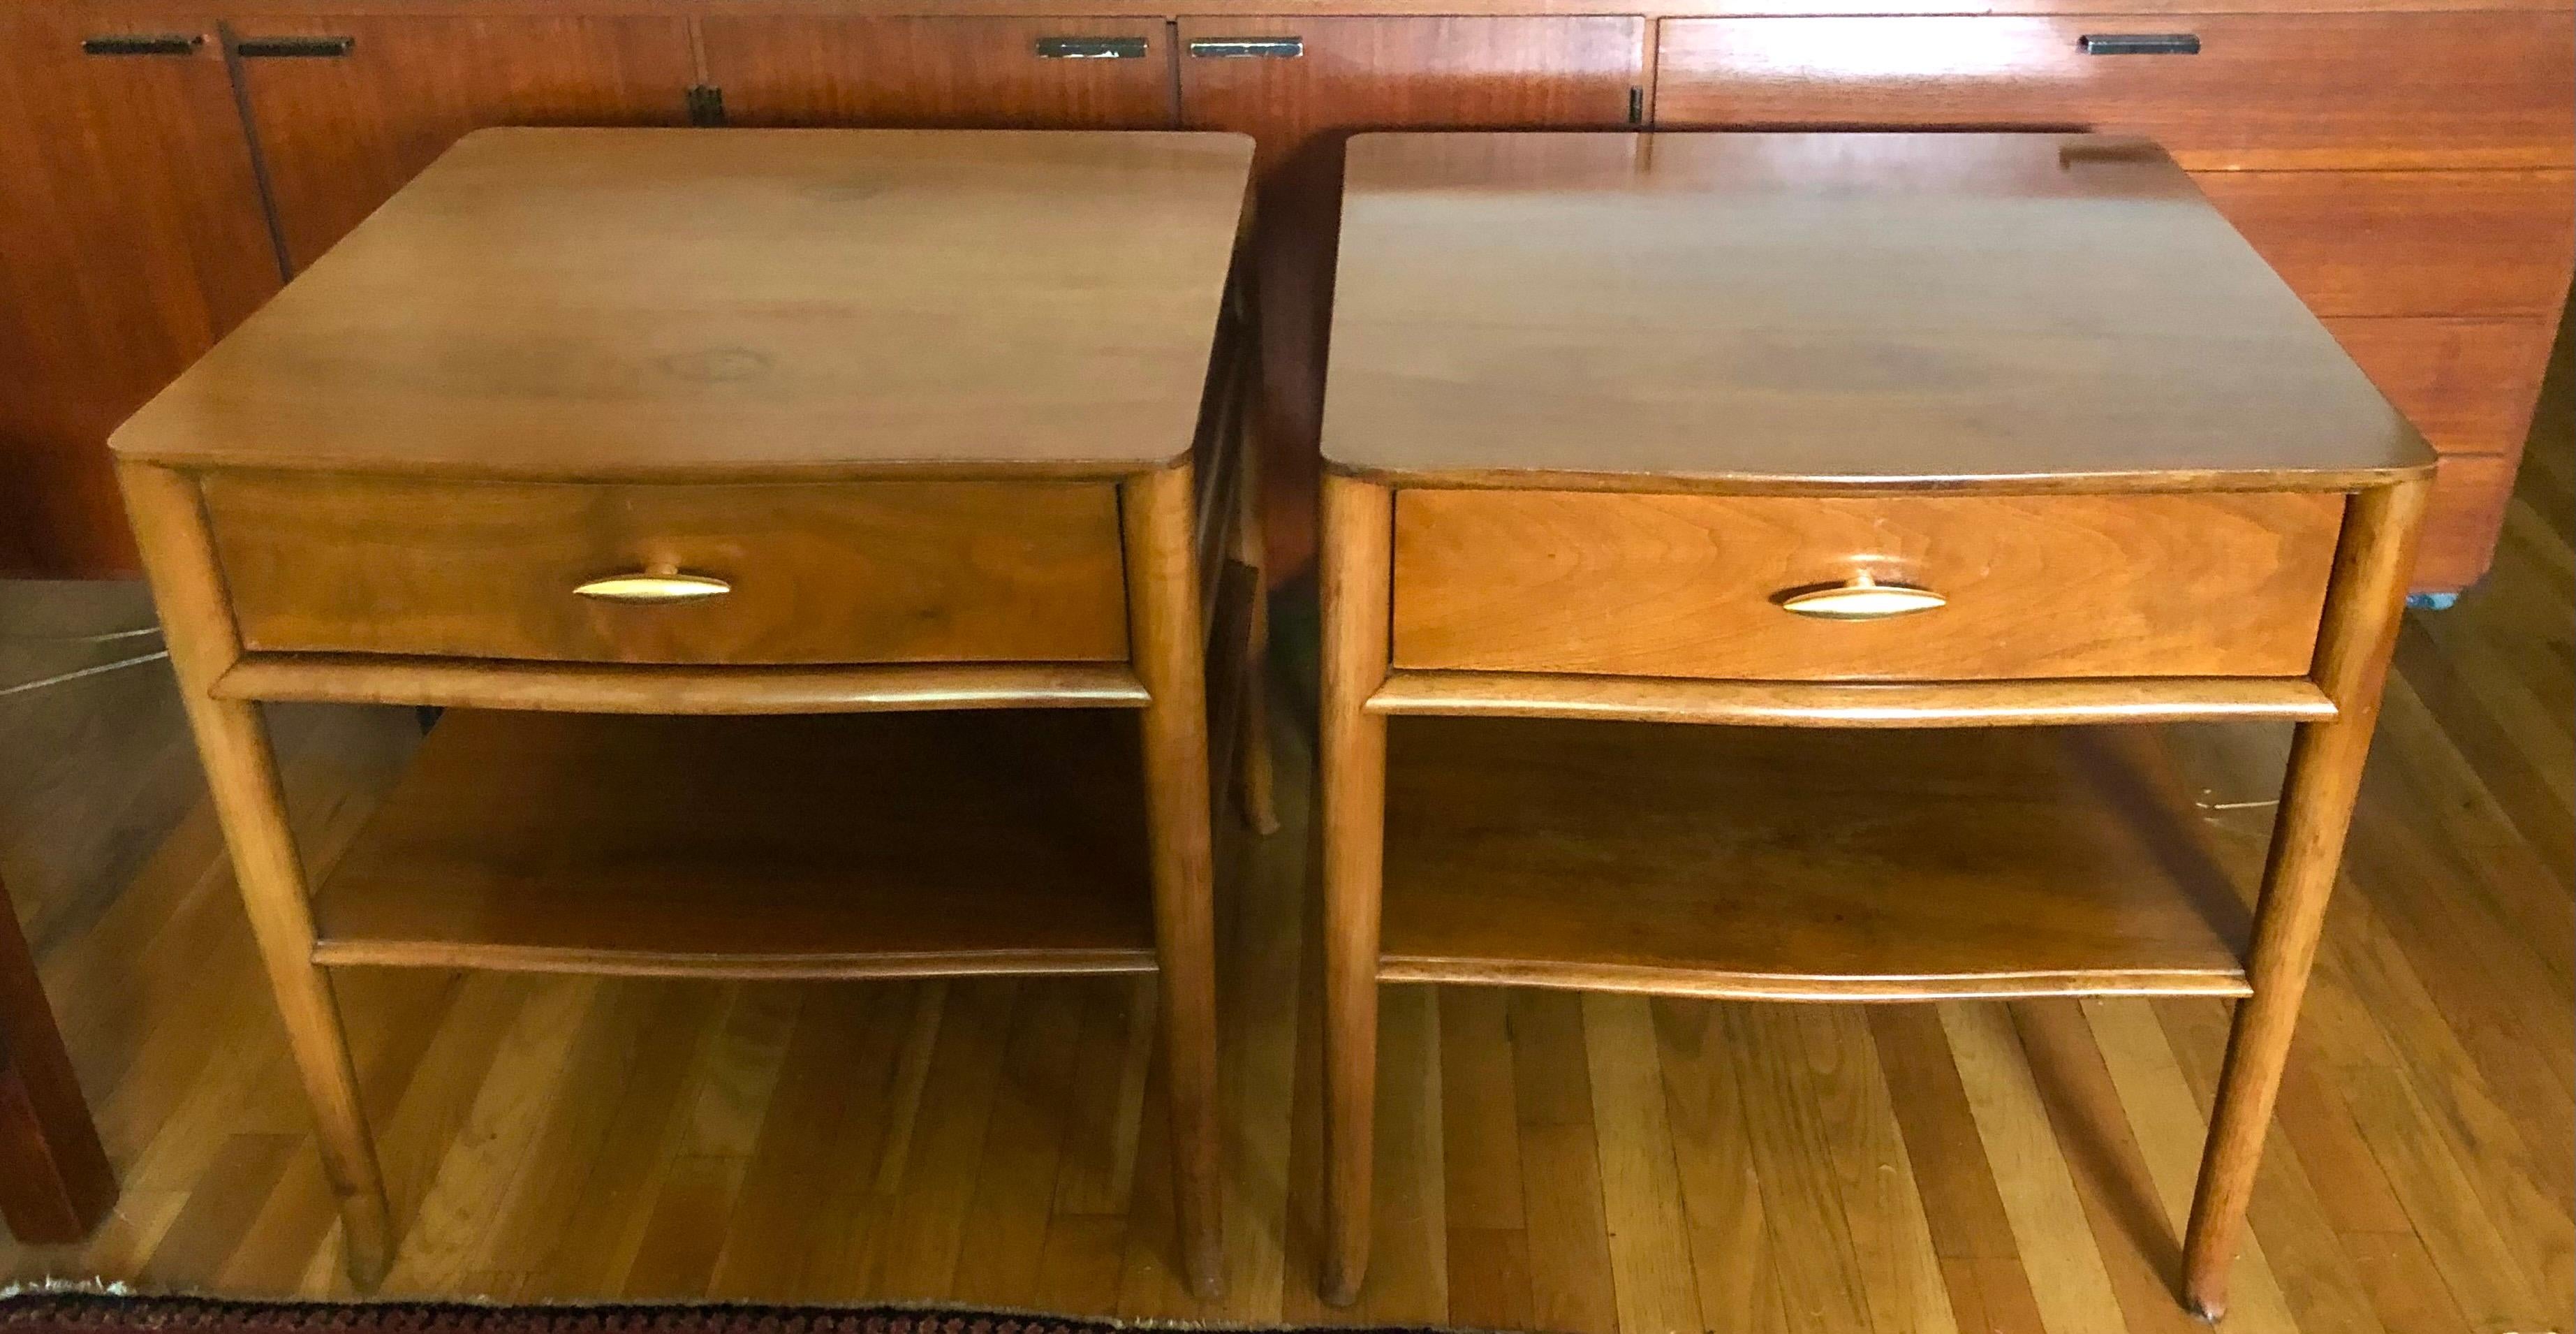 c. 1955, American, these handsome shaped squarish two-tiered tables each have a single drawer and wonderfully figured old growth walnut veneer. The versatile size make these perfect for end tables or nightstands. Finished on the back to allow